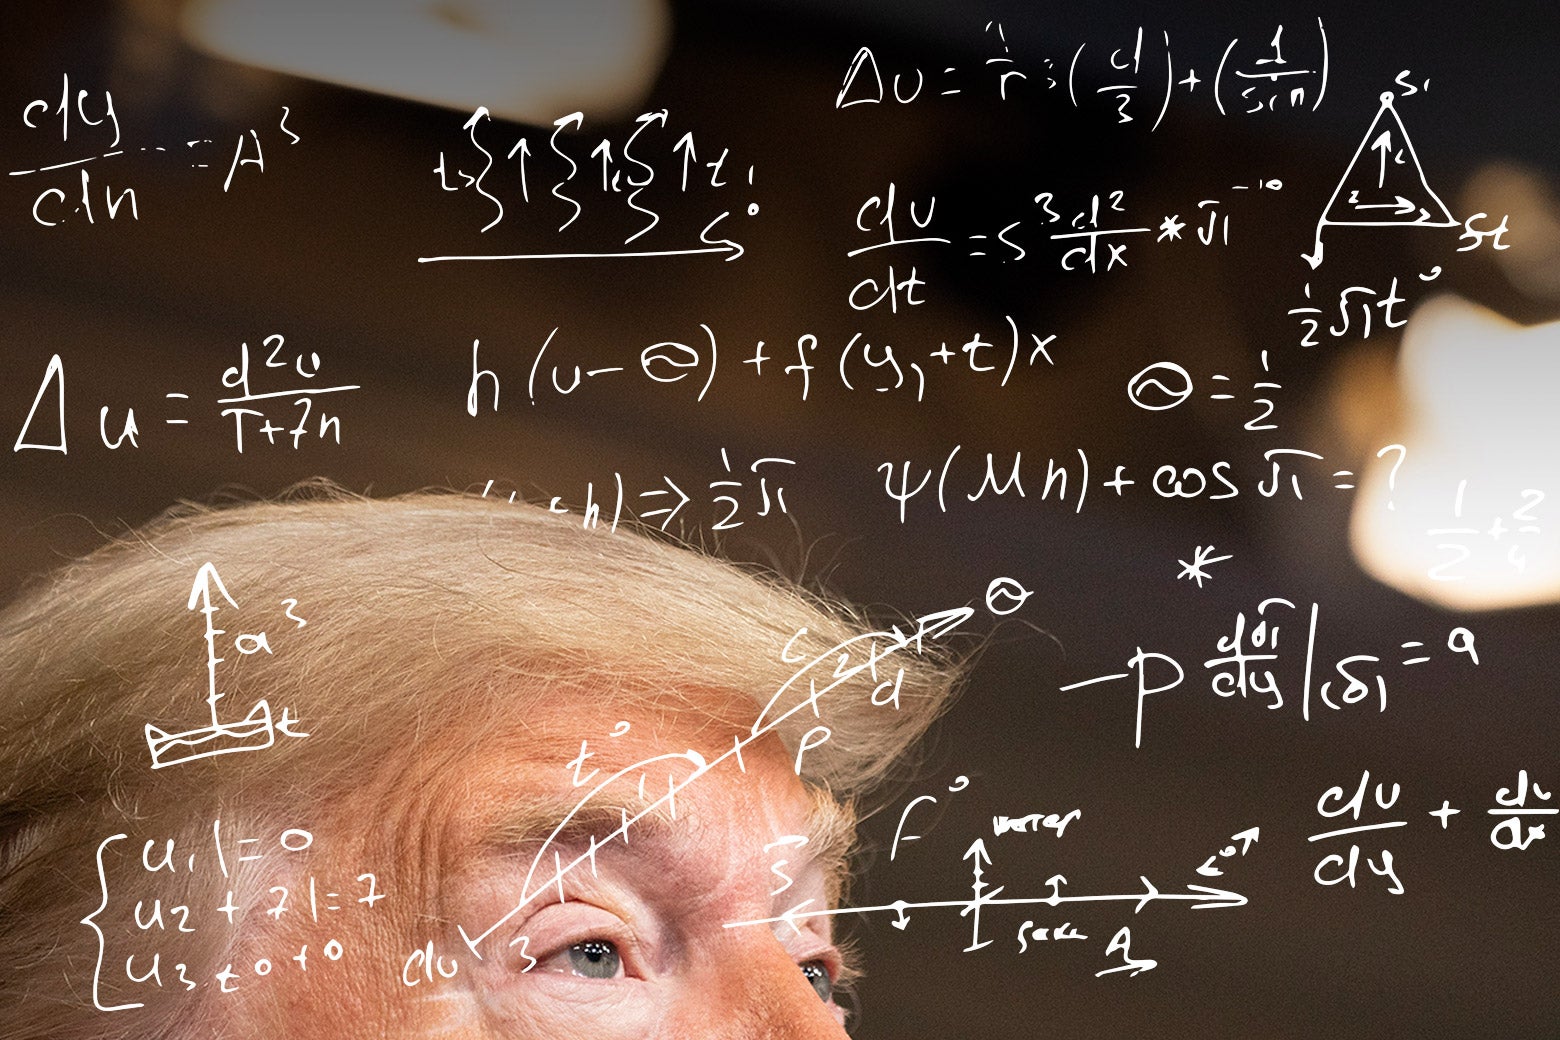 An image of Donald Trump's face superimposed with hand-written math equations and calculations.